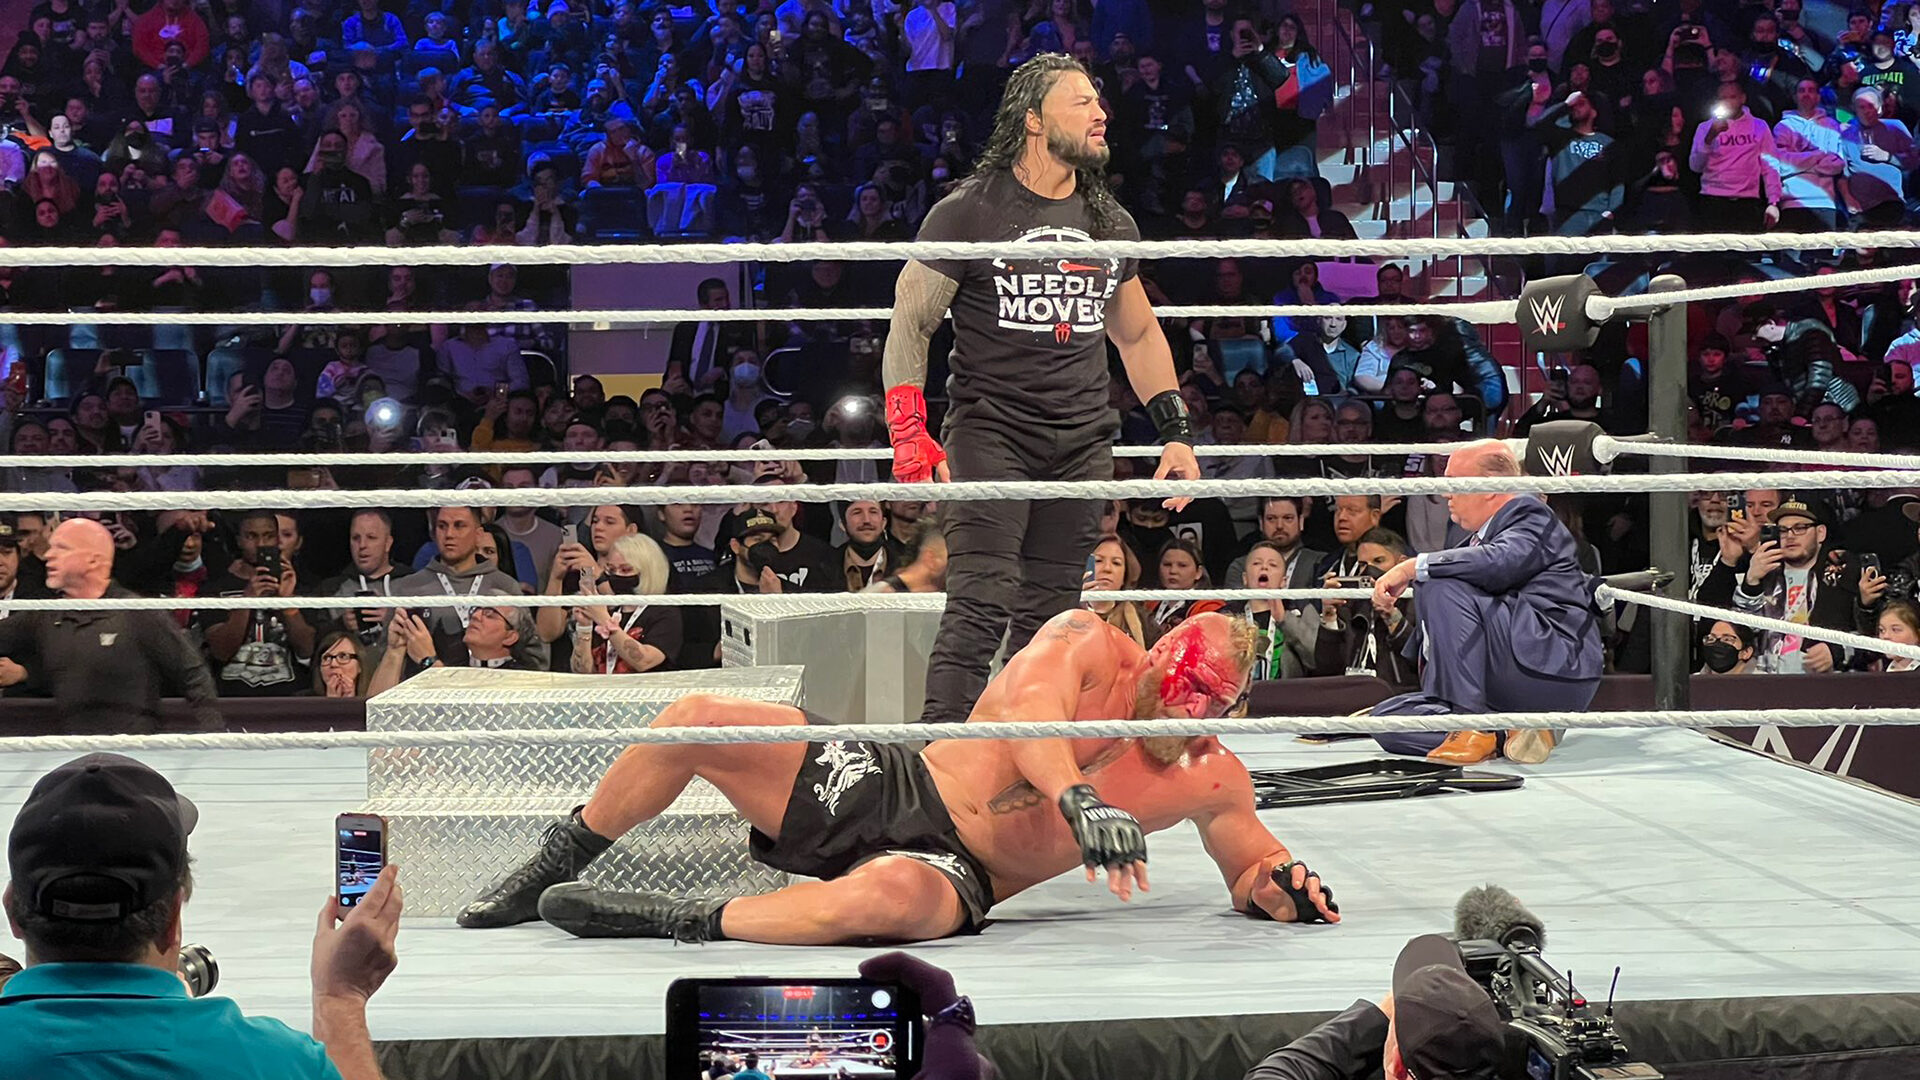 Madison Square Garden Live Event Results: March 5, 2022